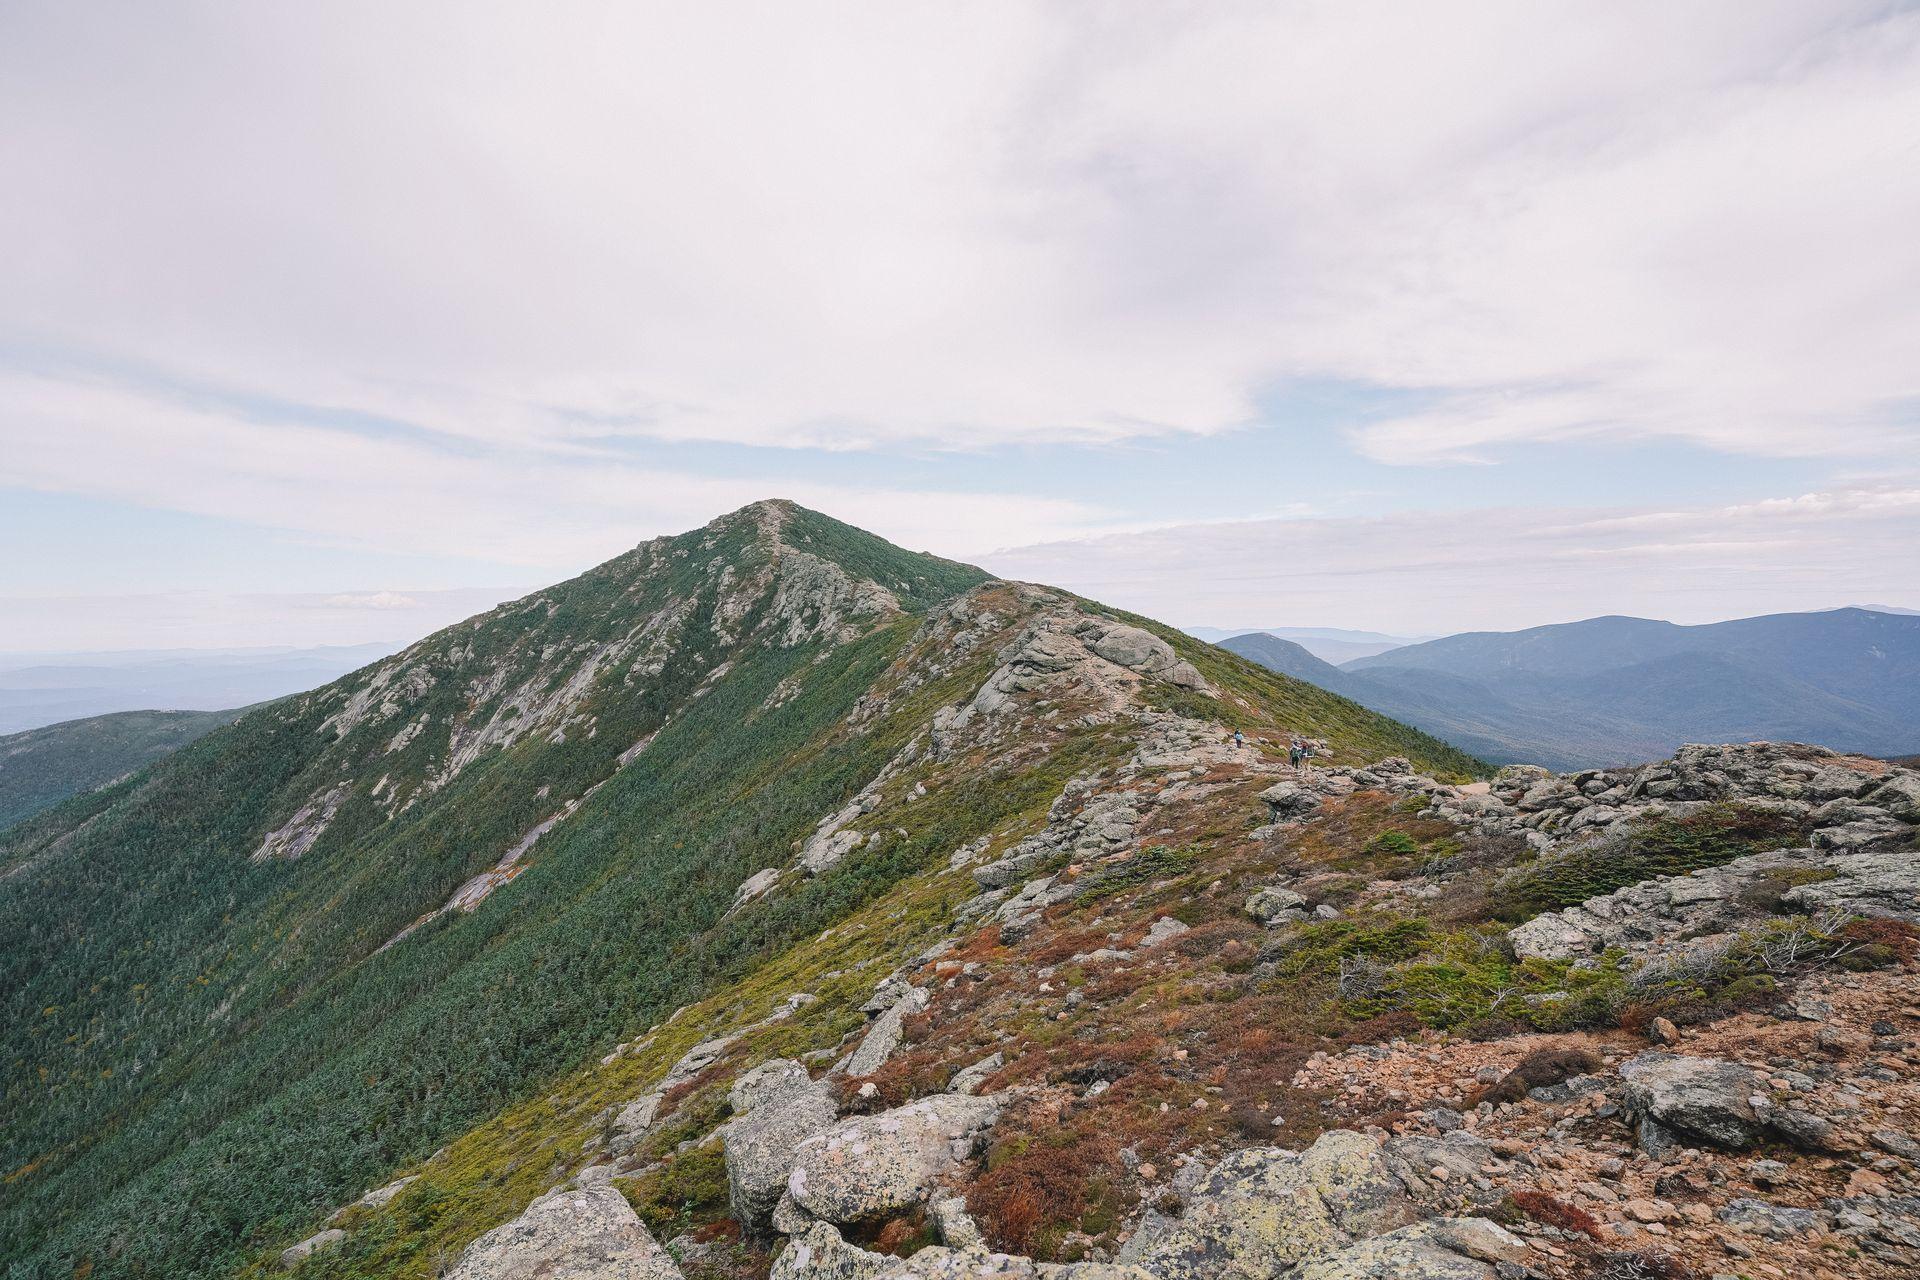 A view of the mountain ridge that hikers climb on the Franconia Ridge Trail.